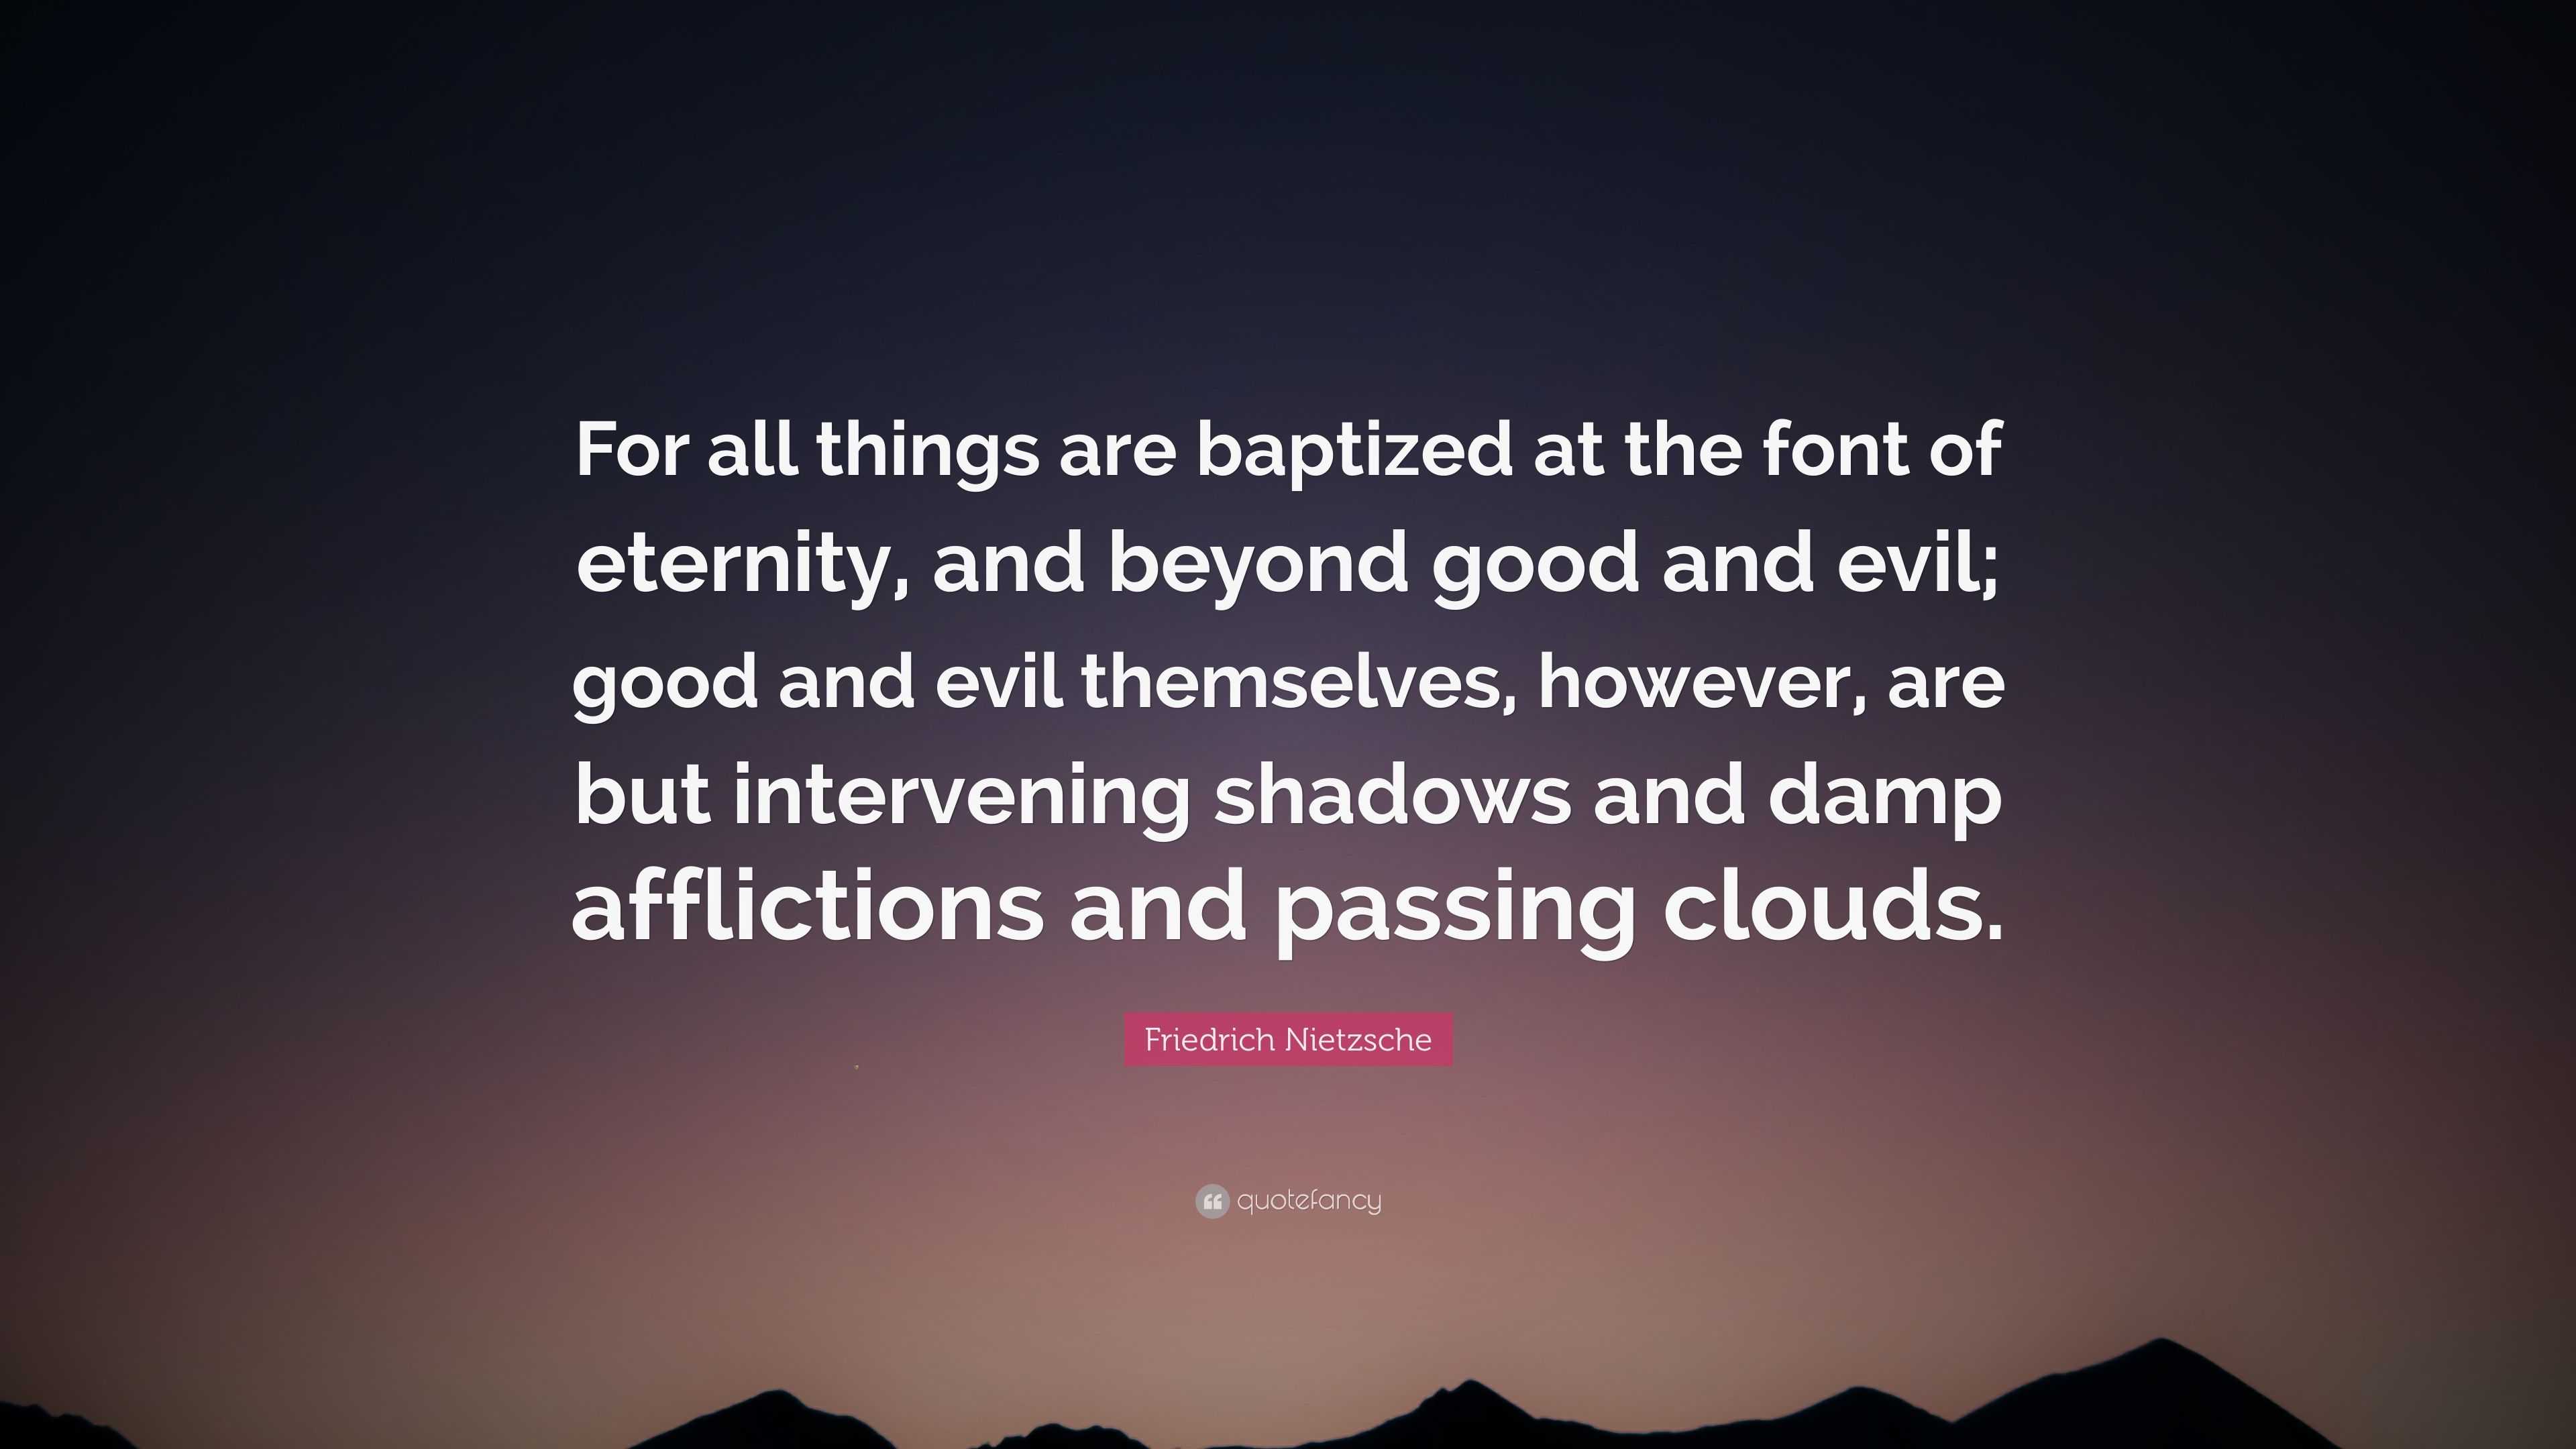 Friedrich Nietzsche Quote “For all things are baptized at the font of